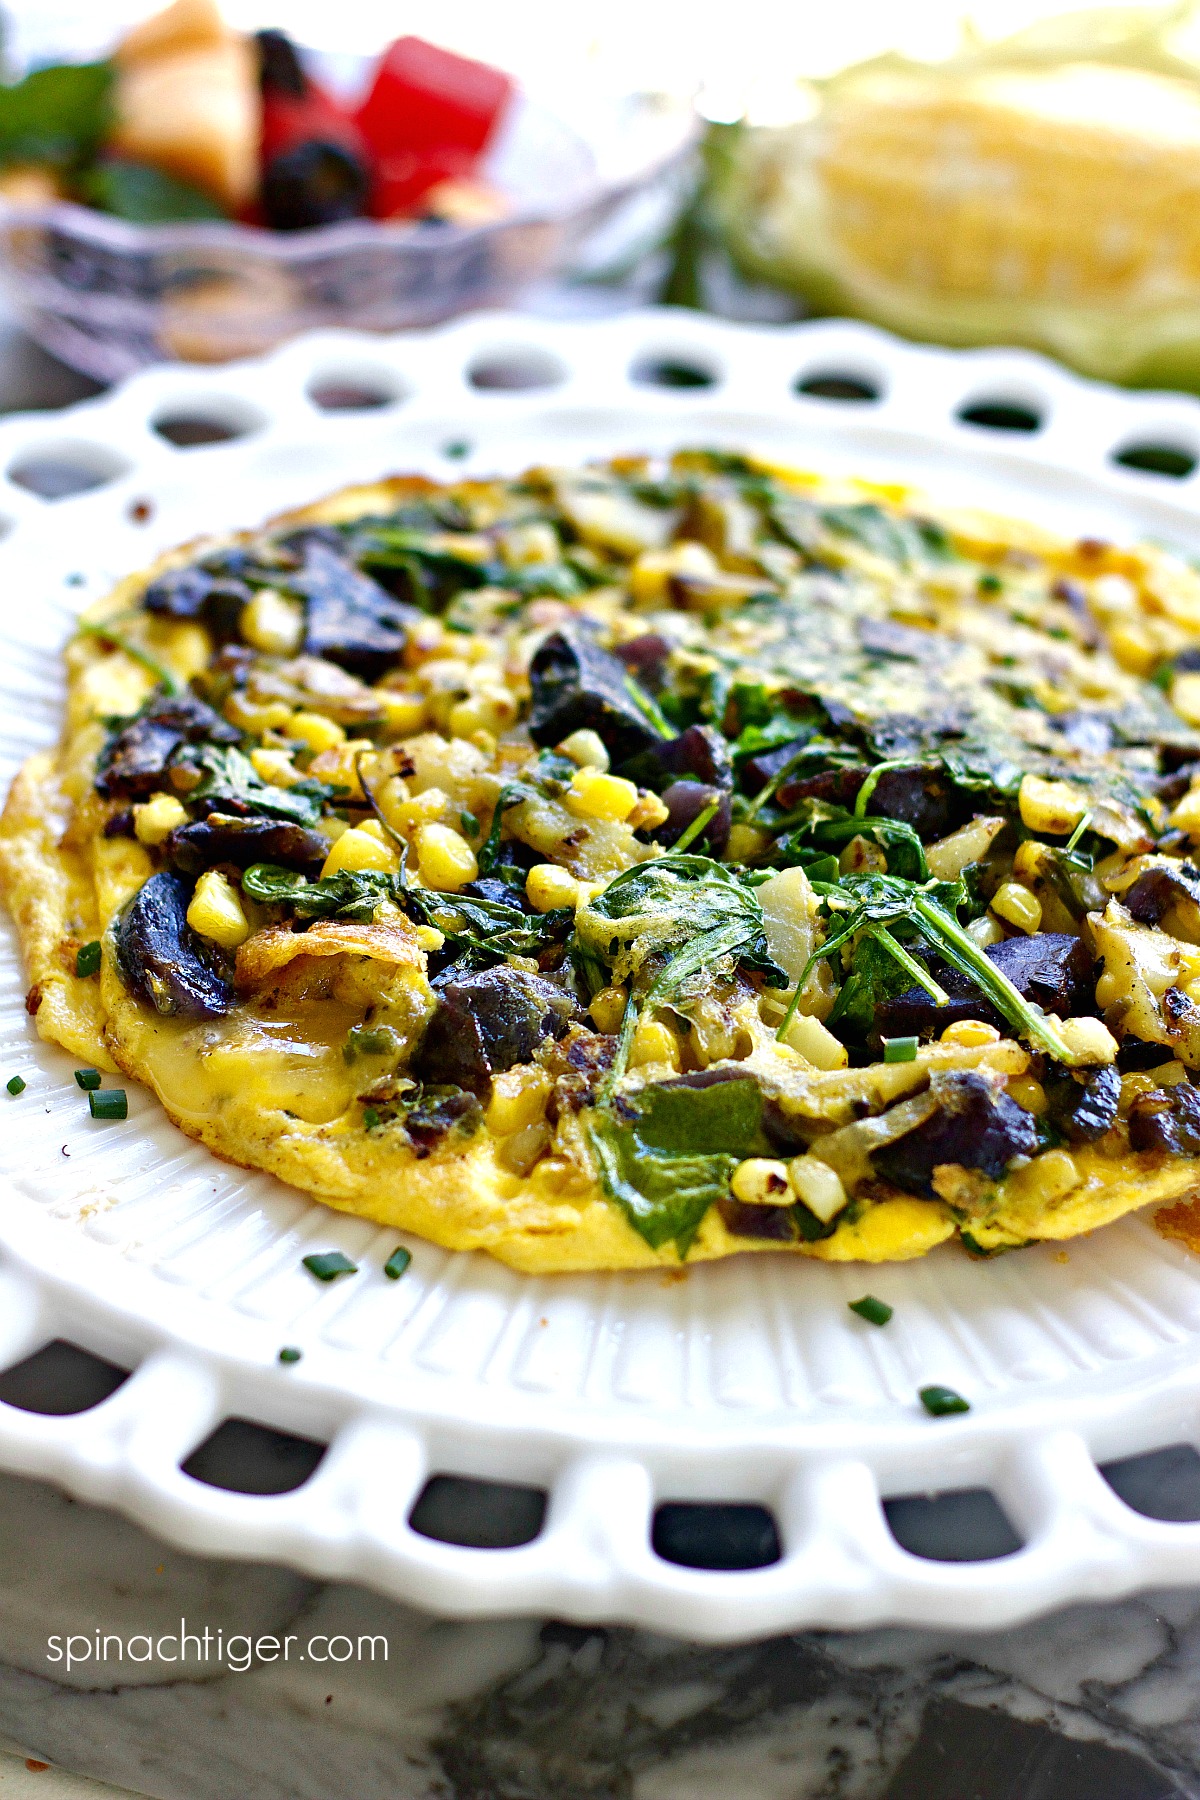 How to make Healthy Frittata stove top from Spinach Tiger